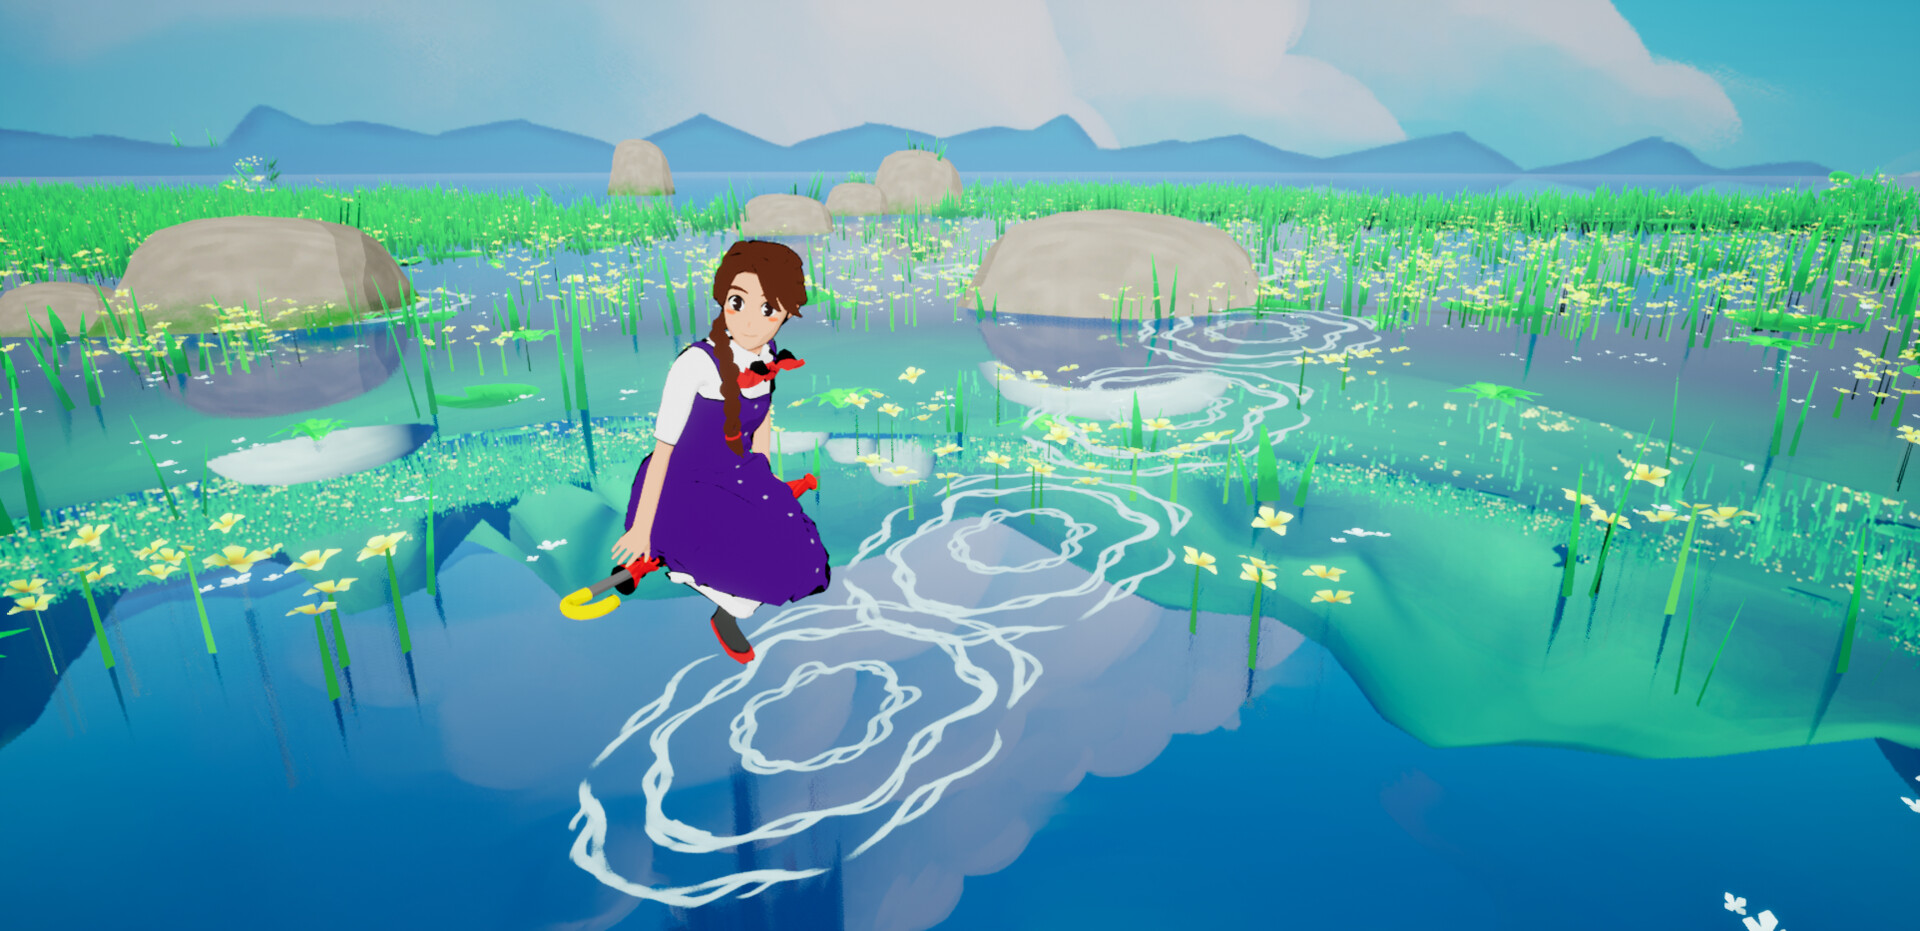 A girl riding an umbrella like a witch over a lake.